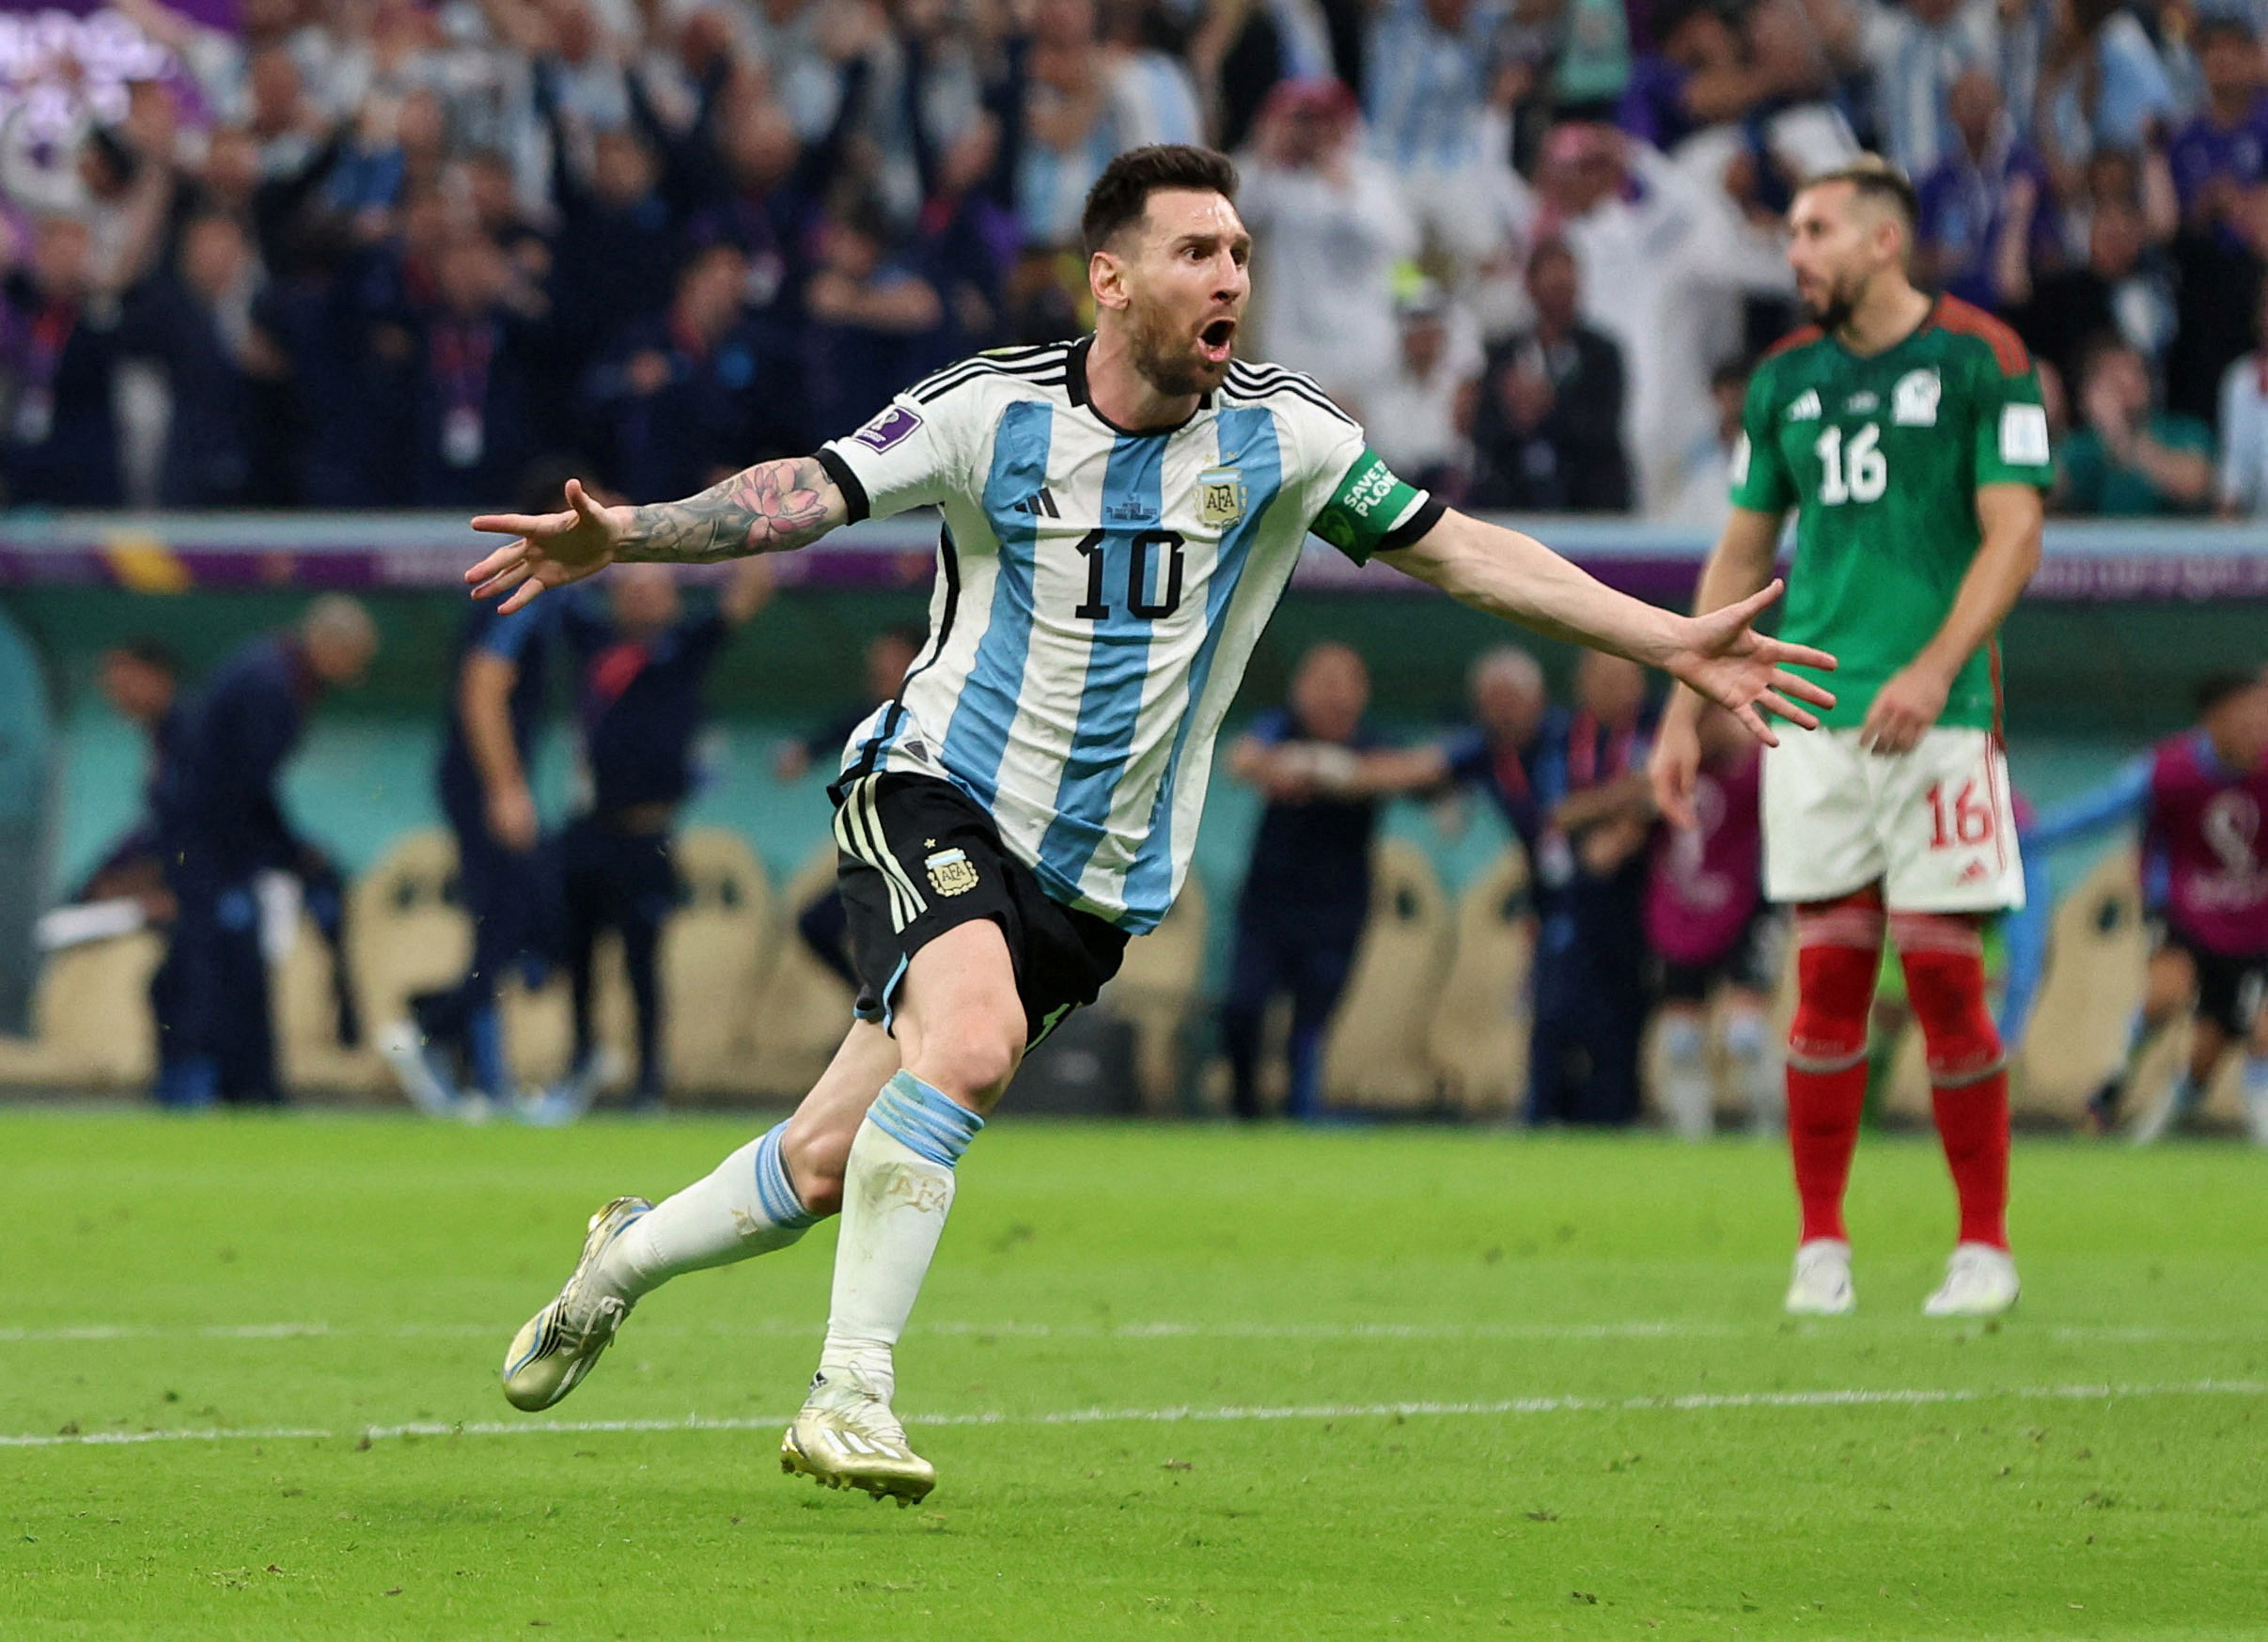 Soccer Football - FIFA World Cup Qatar 2022 - Group C - Argentina v Mexico - Lusail Stadium, Lusail, Qatar - November 26, 2022 Argentina's Lionel Messi celebrates scoring their first goal REUTERS/Pedro Nunes     TPX IMAGES OF THE DAY